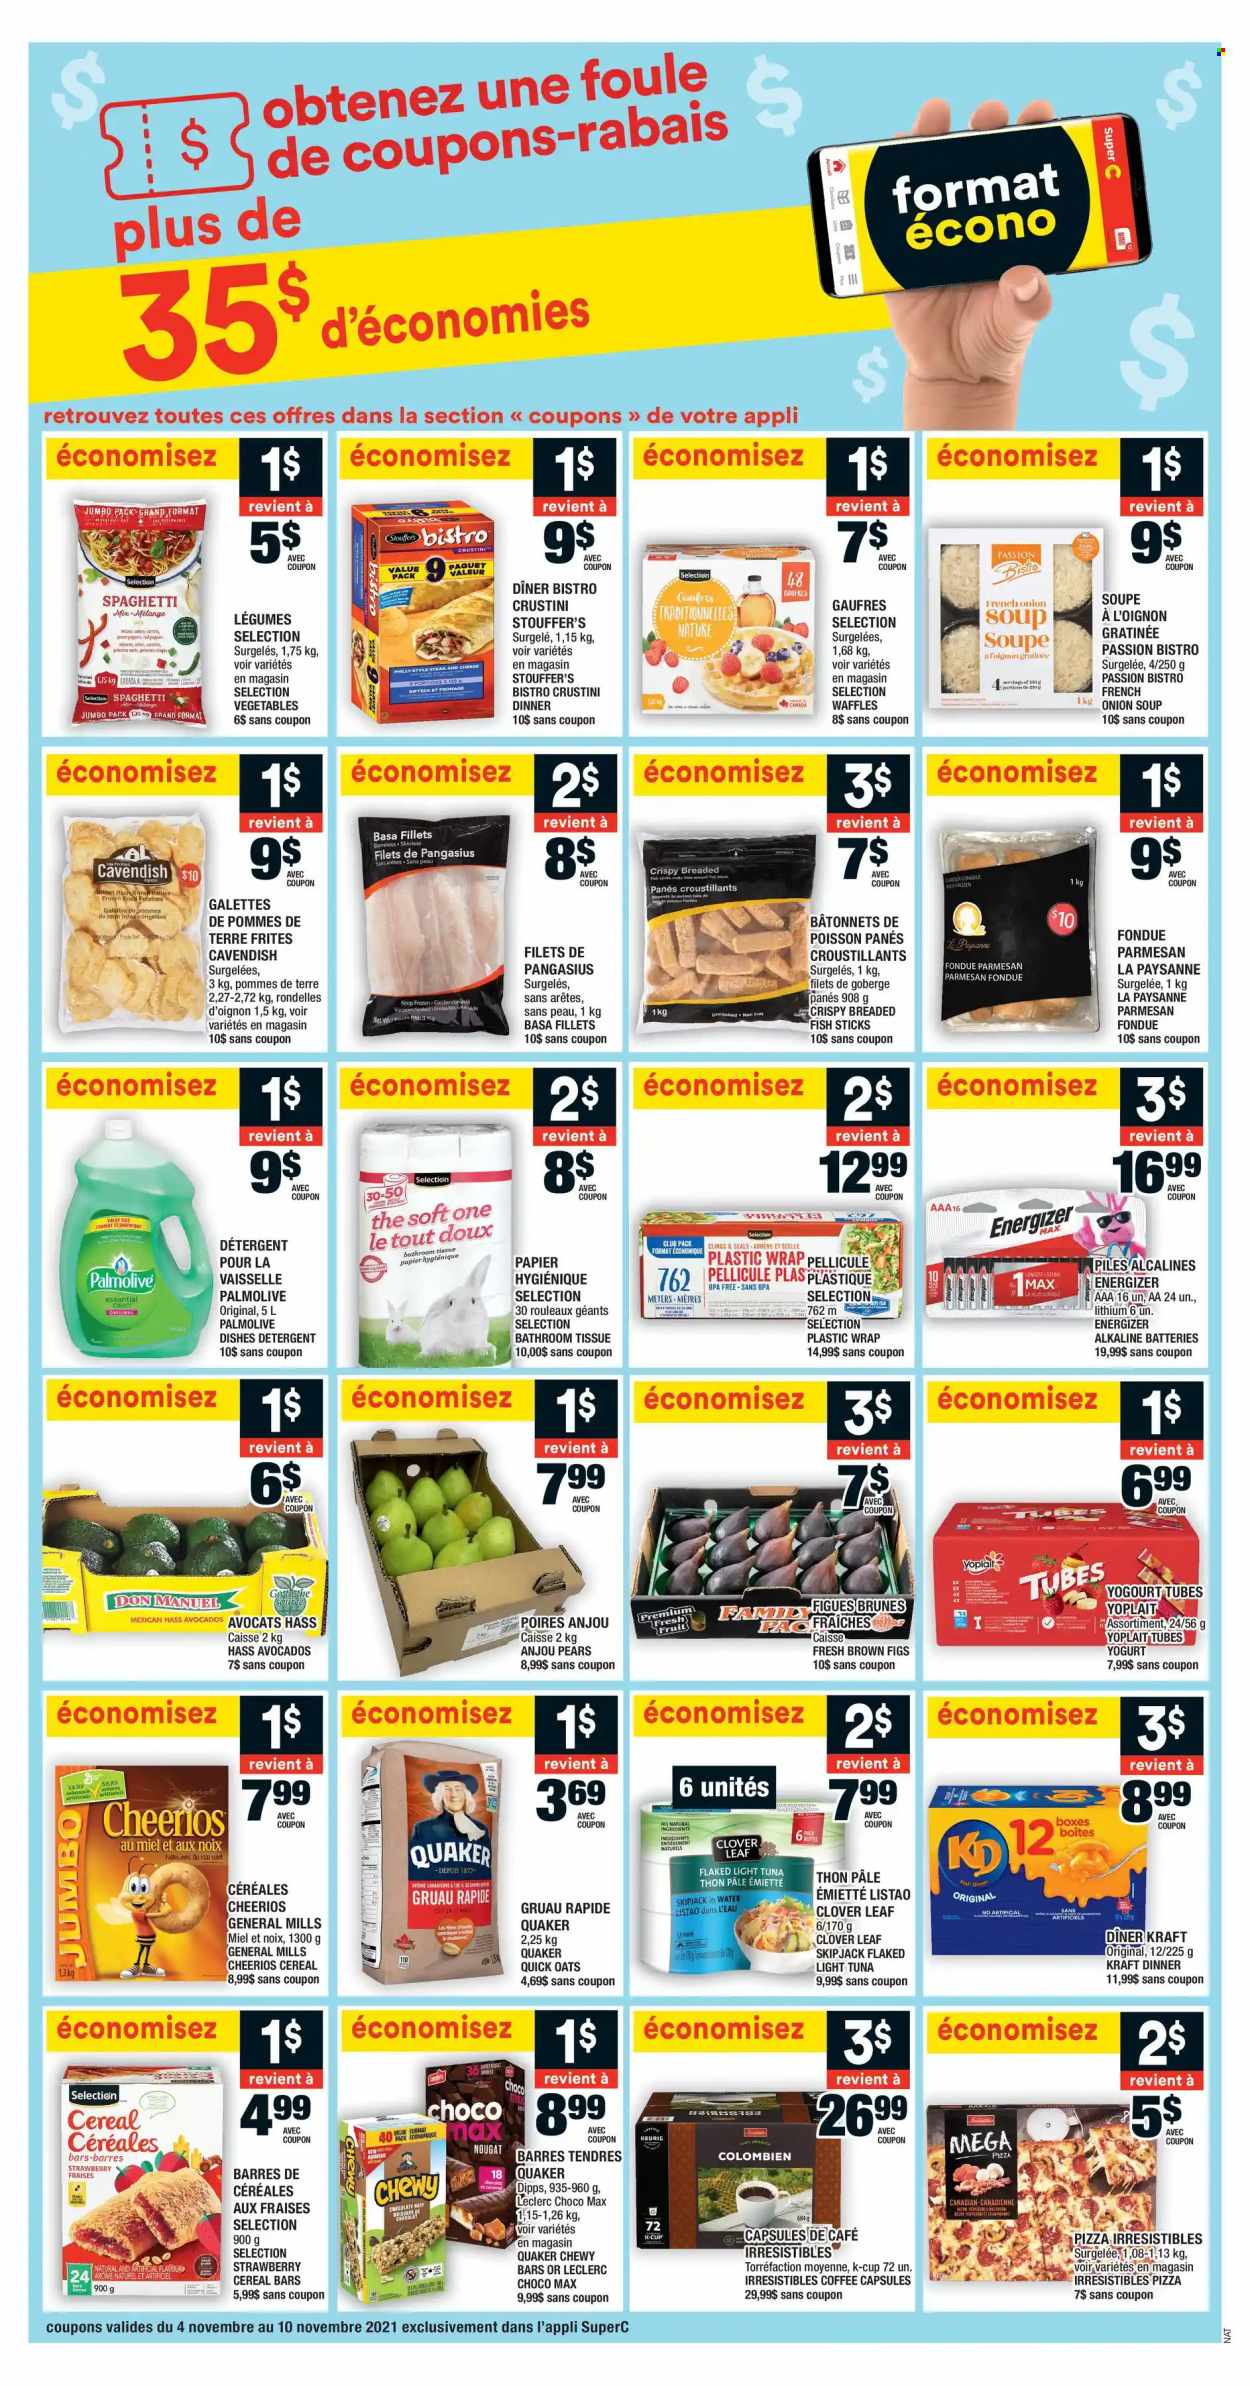 thumbnail - Super C Flyer - November 04, 2021 - November 10, 2021 - Sales products - waffles, avocado, figs, pears, tuna, pangasius, fish, fish fingers, fish sticks, spaghetti, pizza, onion soup, soup, Quaker, breaded fish, Kraft®, parmesan, yoghurt, Clover, Yoplait, Stouffer's, chocolate, cereal bar, oats, light tuna, cereals, Cheerios, Quick Oats, coffee, coffee capsules, K-Cups, Keurig, bath tissue, Palmolive, detergent, Energizer, steak, nougat. Page 12.